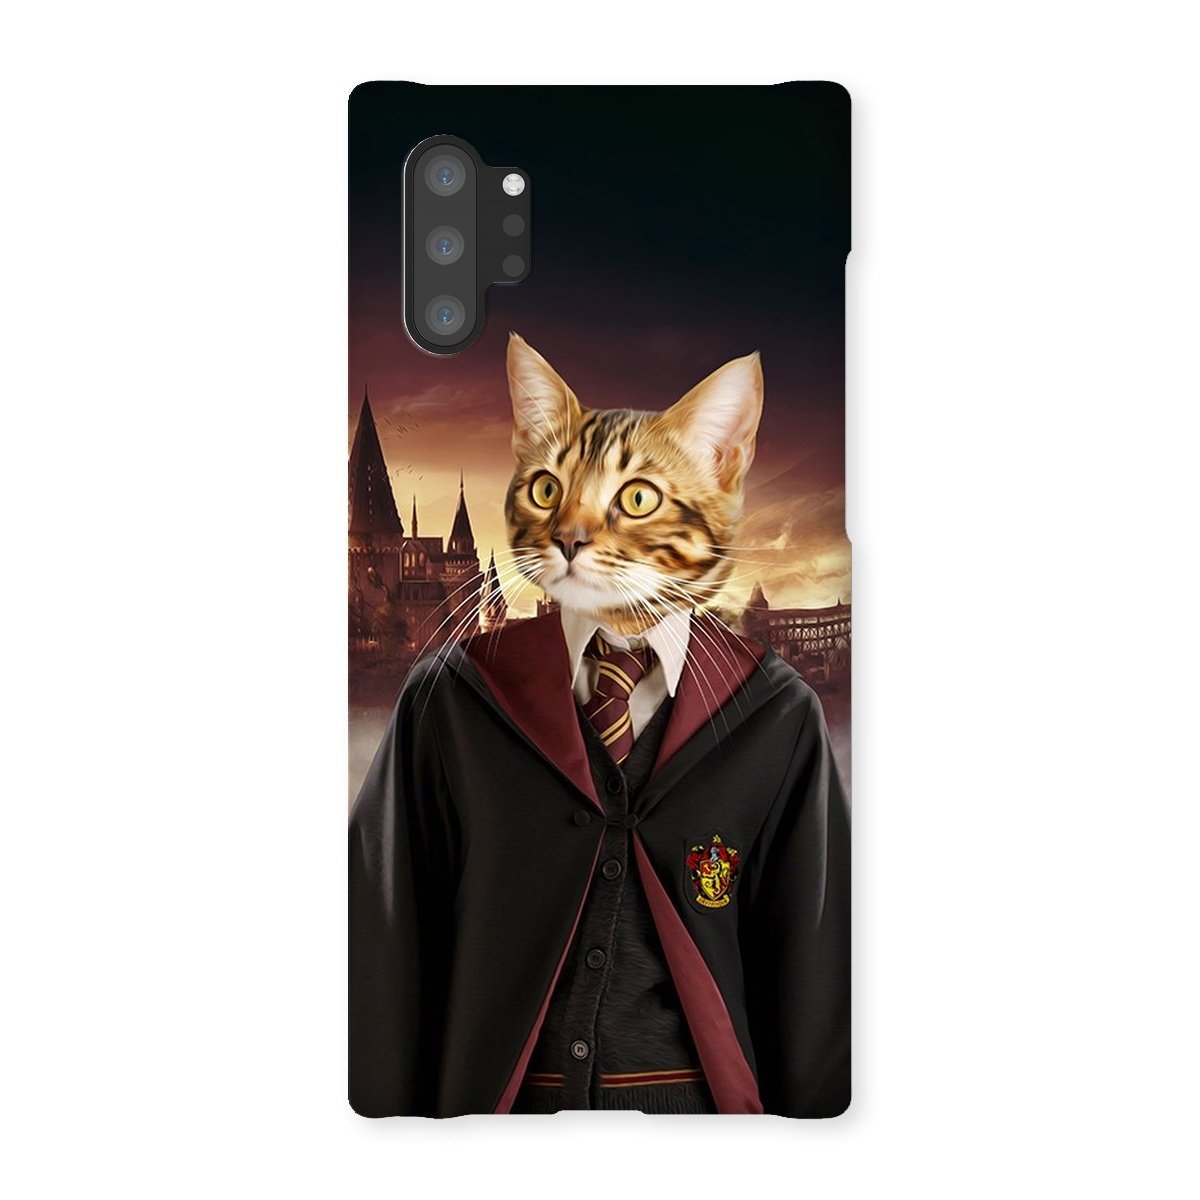 Gryffindor (Harry Potter Inspired): Custom Pet Phone Case - Paw & Glory - paw and glory, personalized dog phone case, personalised dog phone case uk, dog and owner phone case, pet art phone case, personalised puppy phone case, iphone 11 case dogs, Pet Portraits phone case,